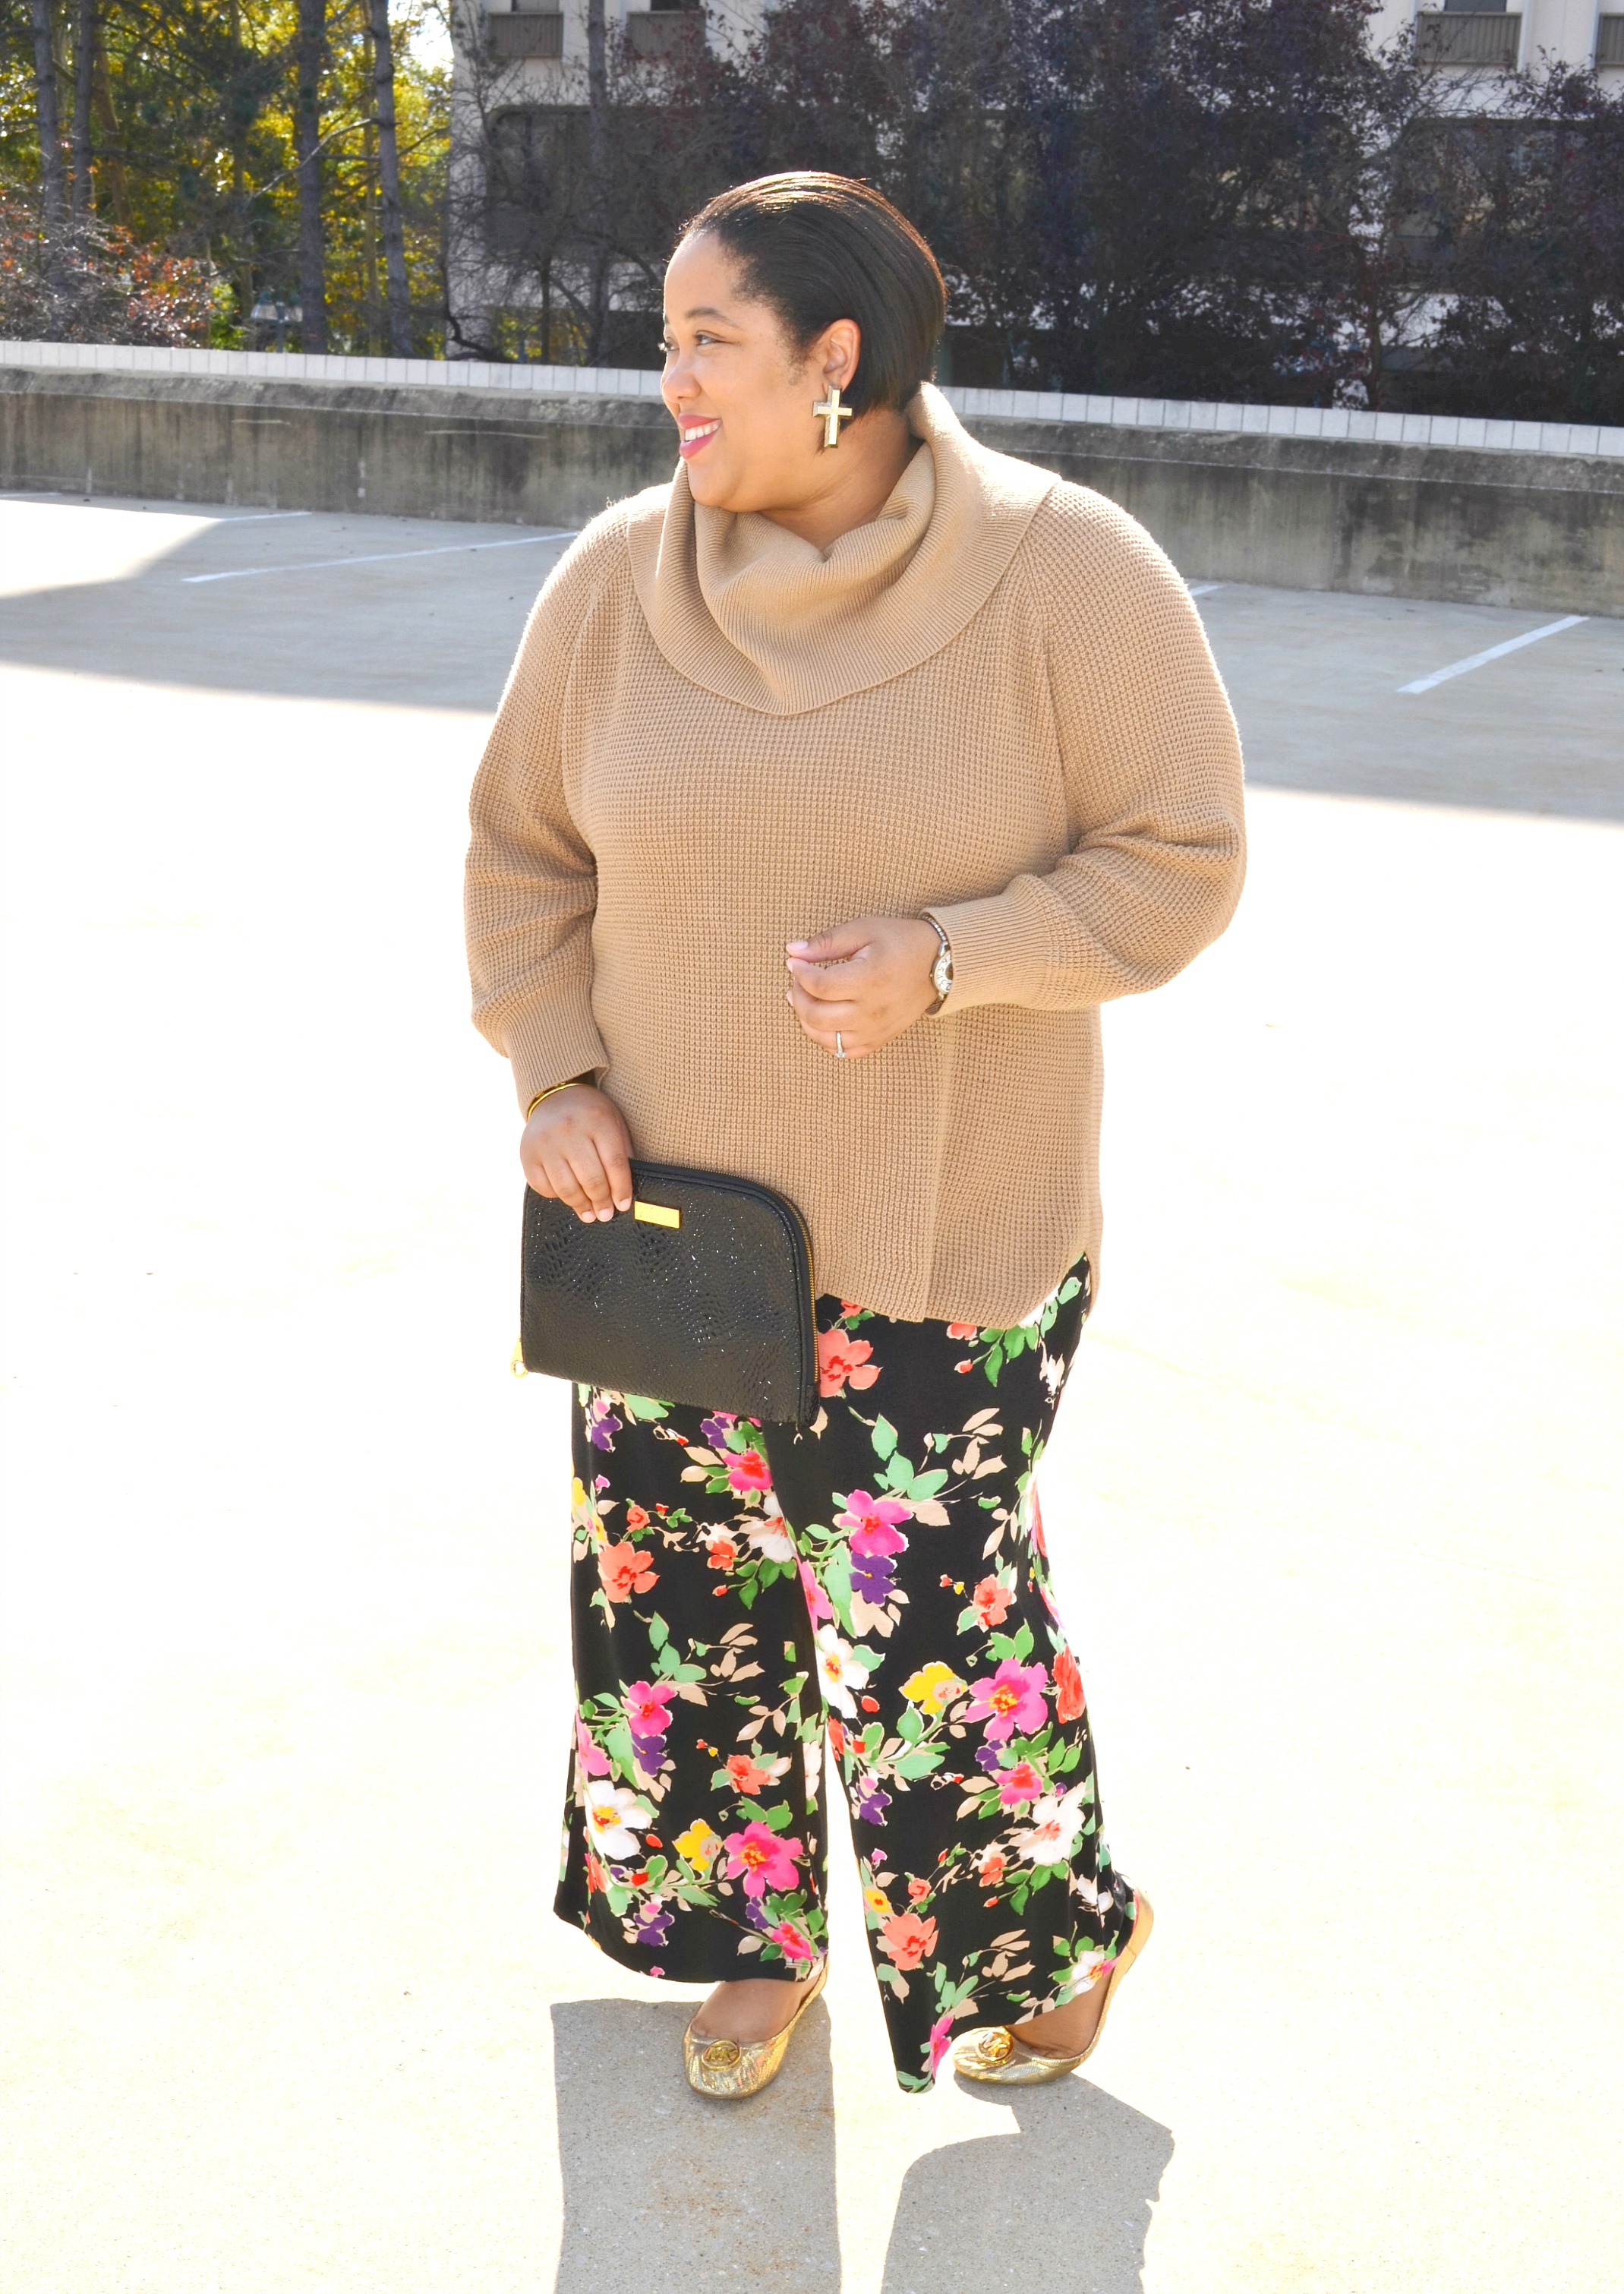 Fall Florals - Fall Outfit Inspiration